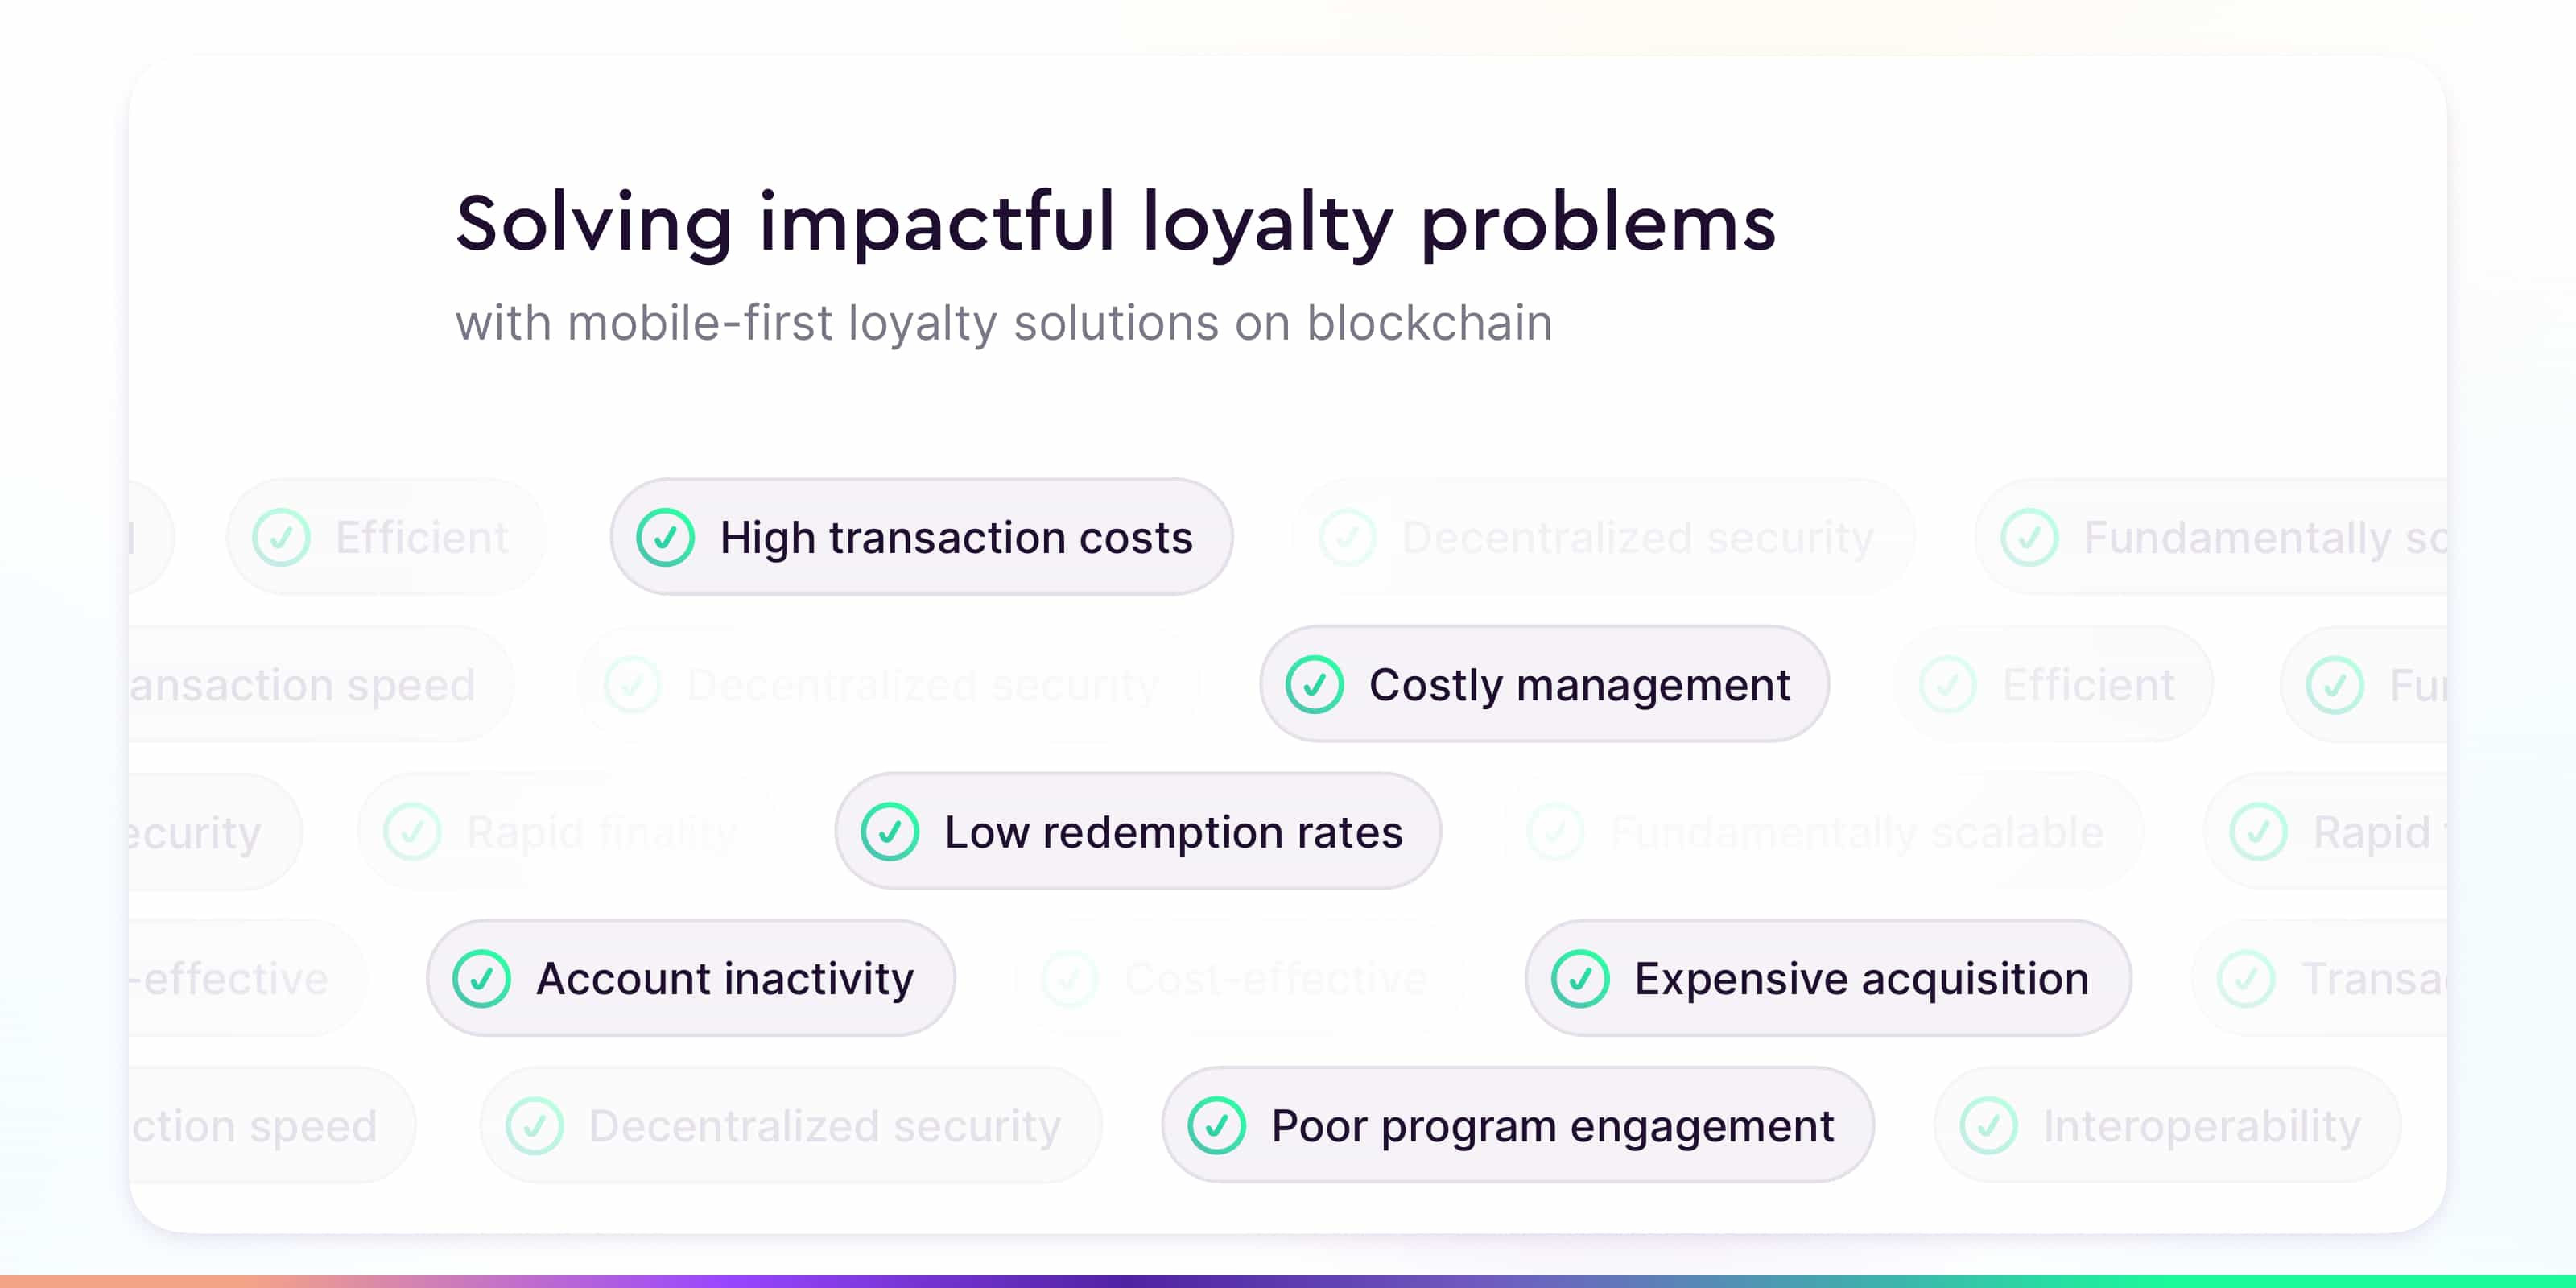 Solving impactful problems of the loyalty industry with mobile blockchain loyalty programs